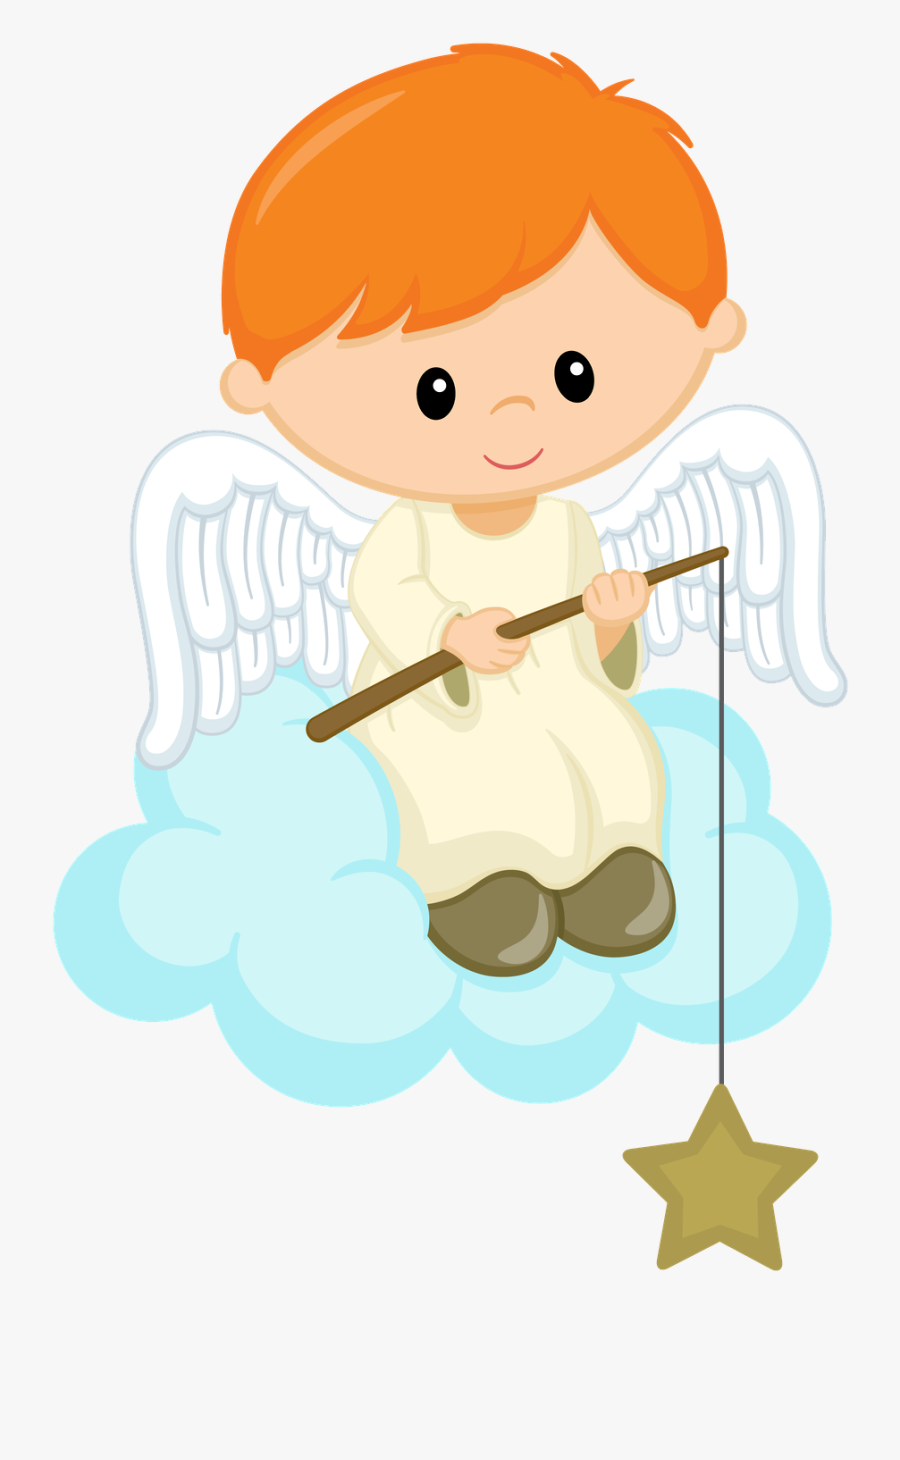 Pin By Jeny Chique On Bautizo Para Communion - Baby Angel Clipart Png, Transparent Clipart